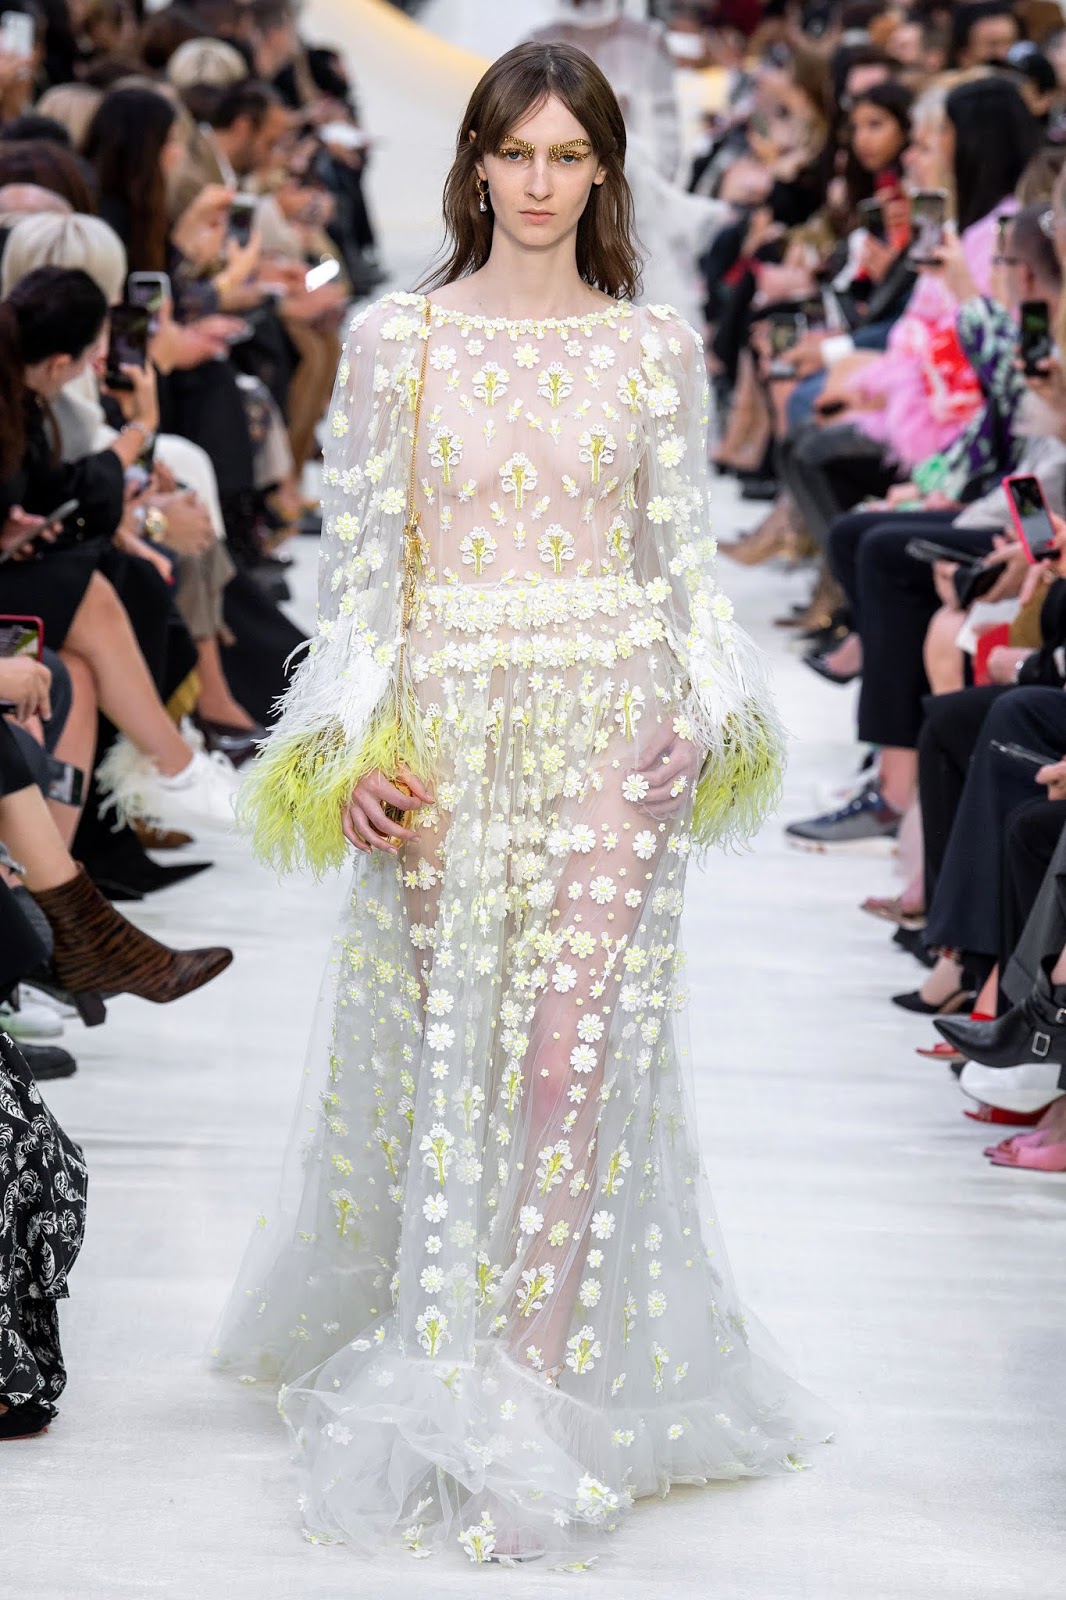 Give me the GLAM: Valentino Gorgeous